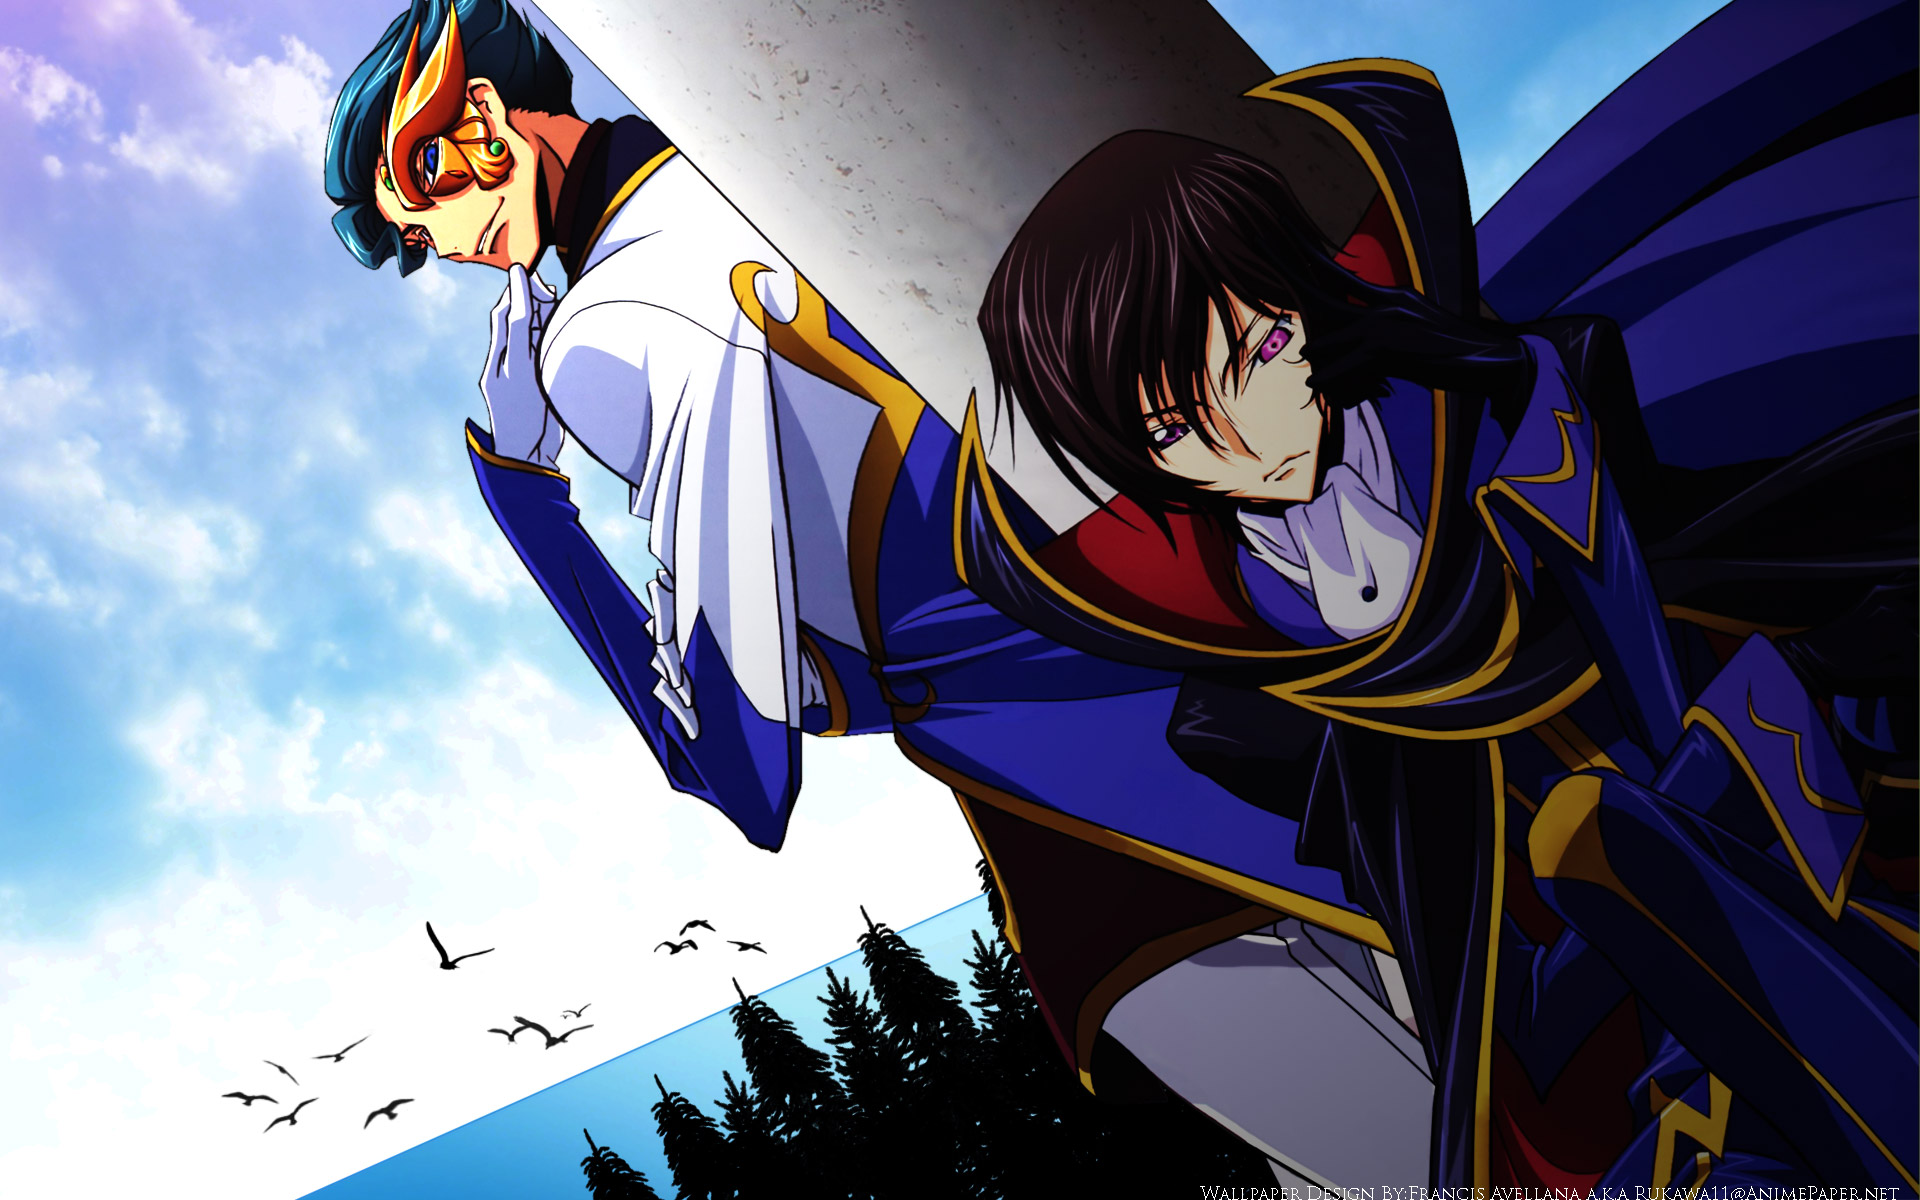 Wallpaper Code Geass 14225 high quality Backgrounds for mobile iphone